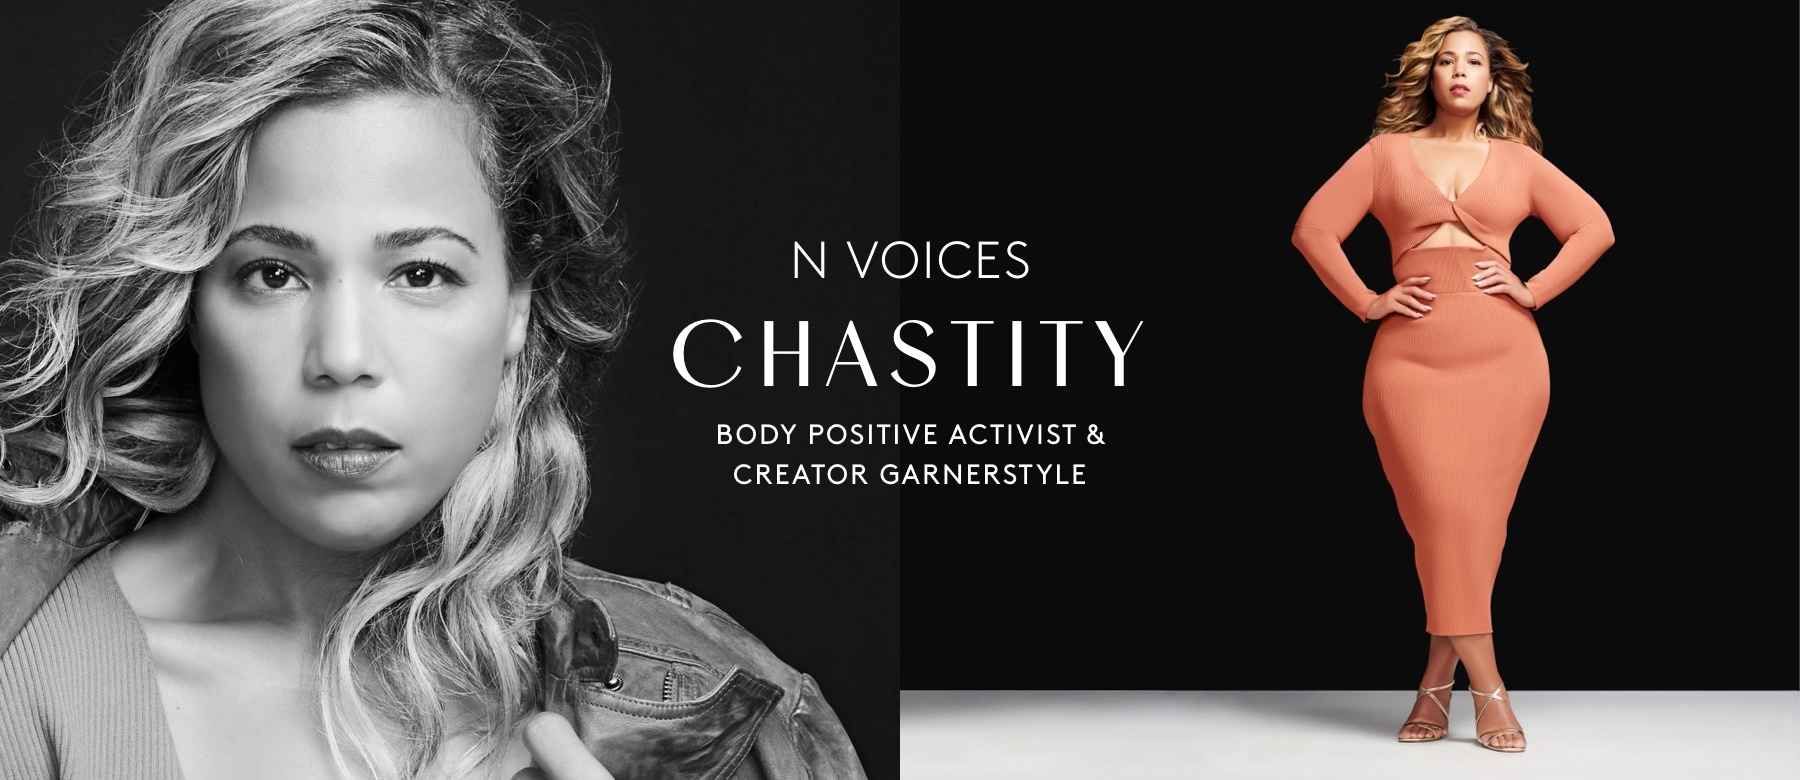 N Voices Chastity